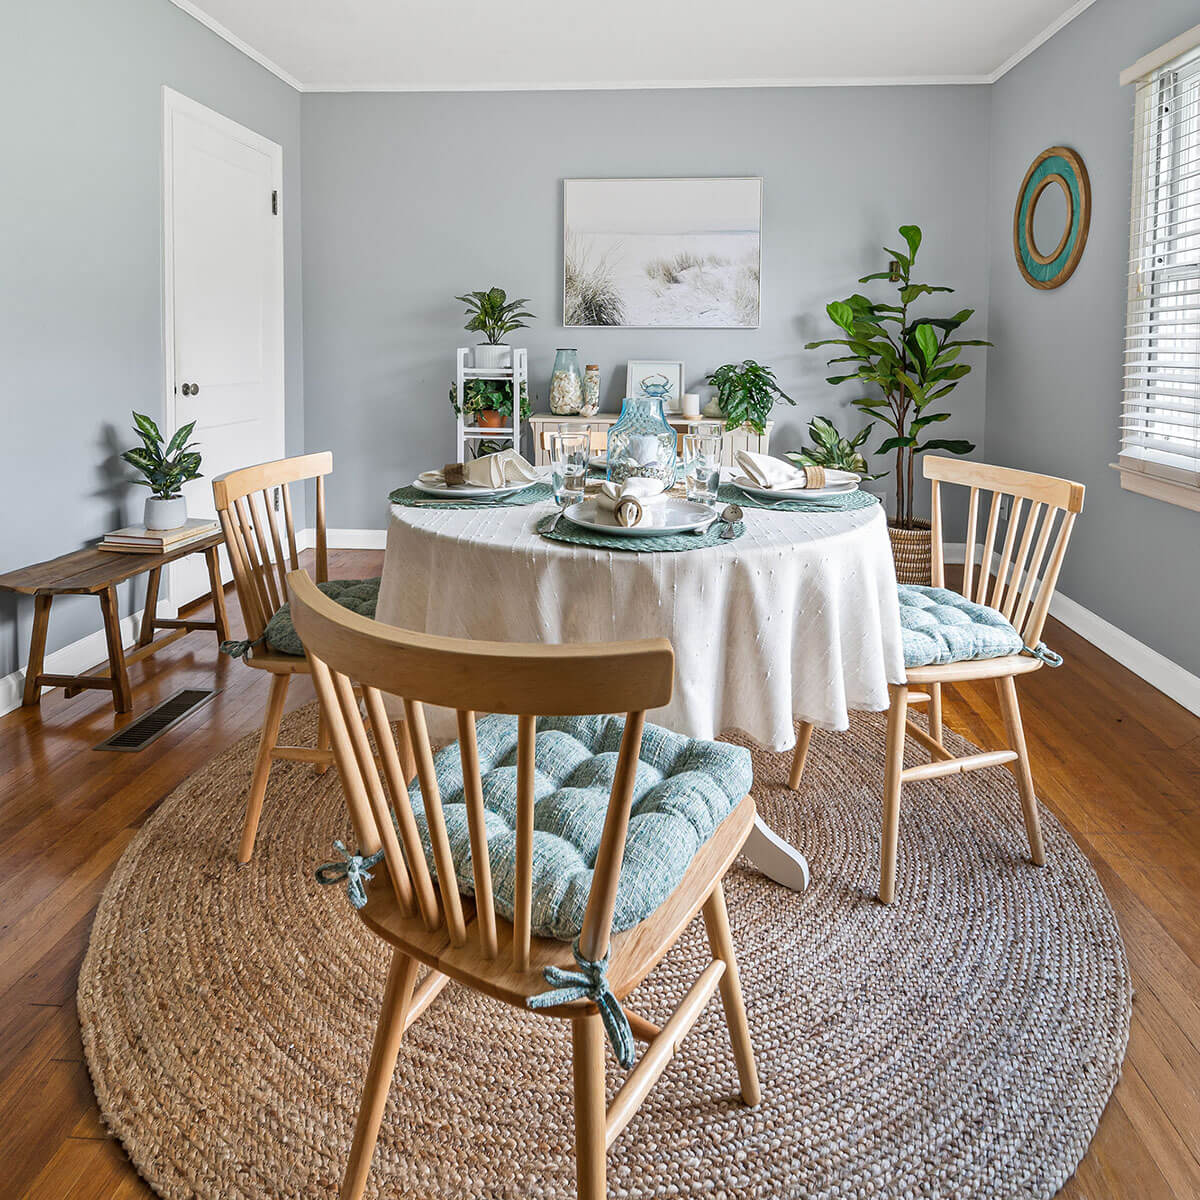 brisbane boucle chair pads on natural wooden chairs in coastal dining room